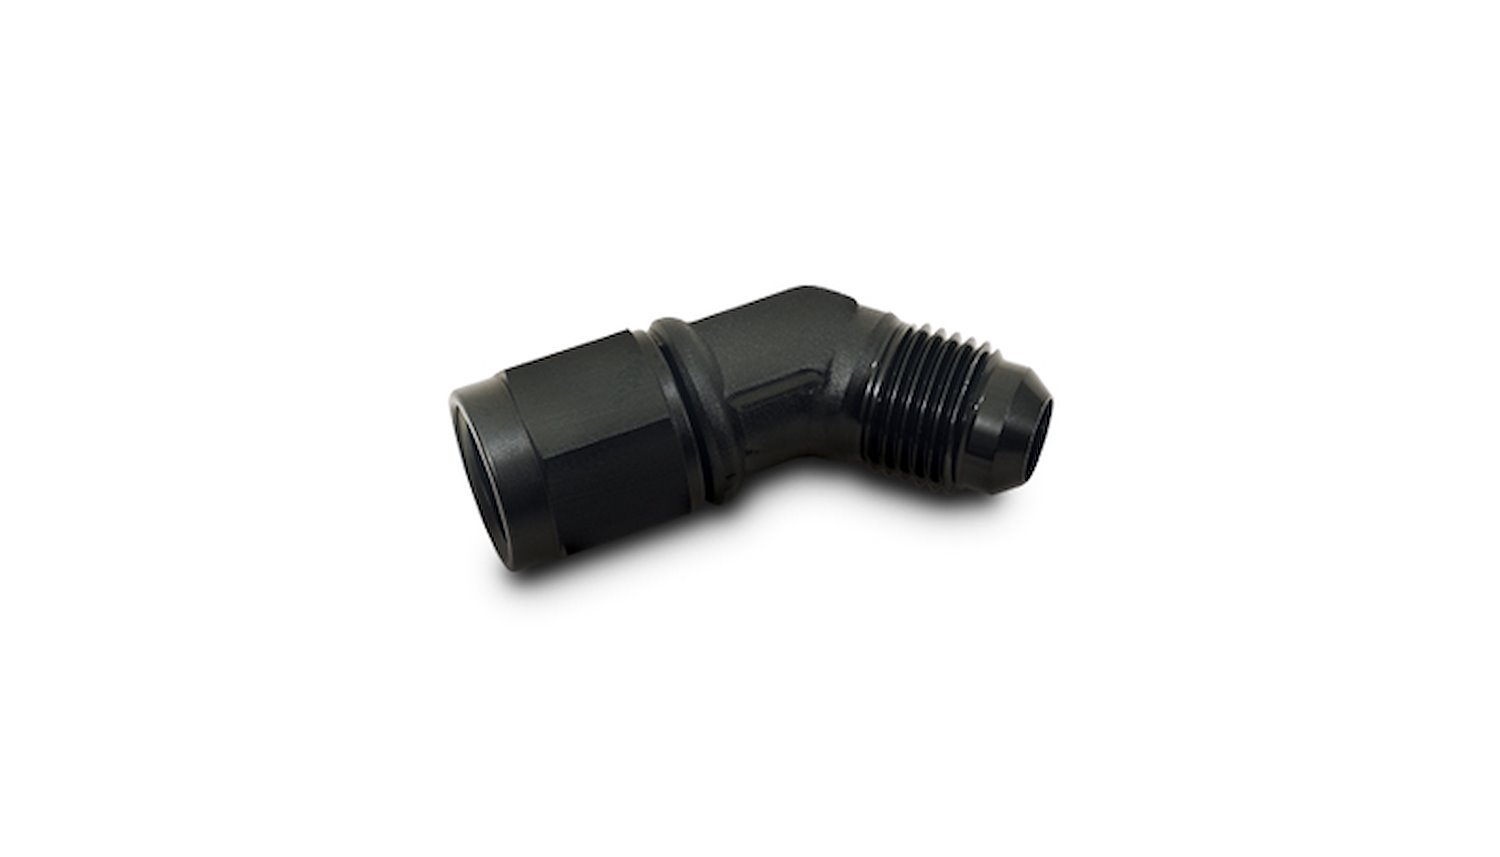 Female to Male Swivel Adapter -4AN X -4AN